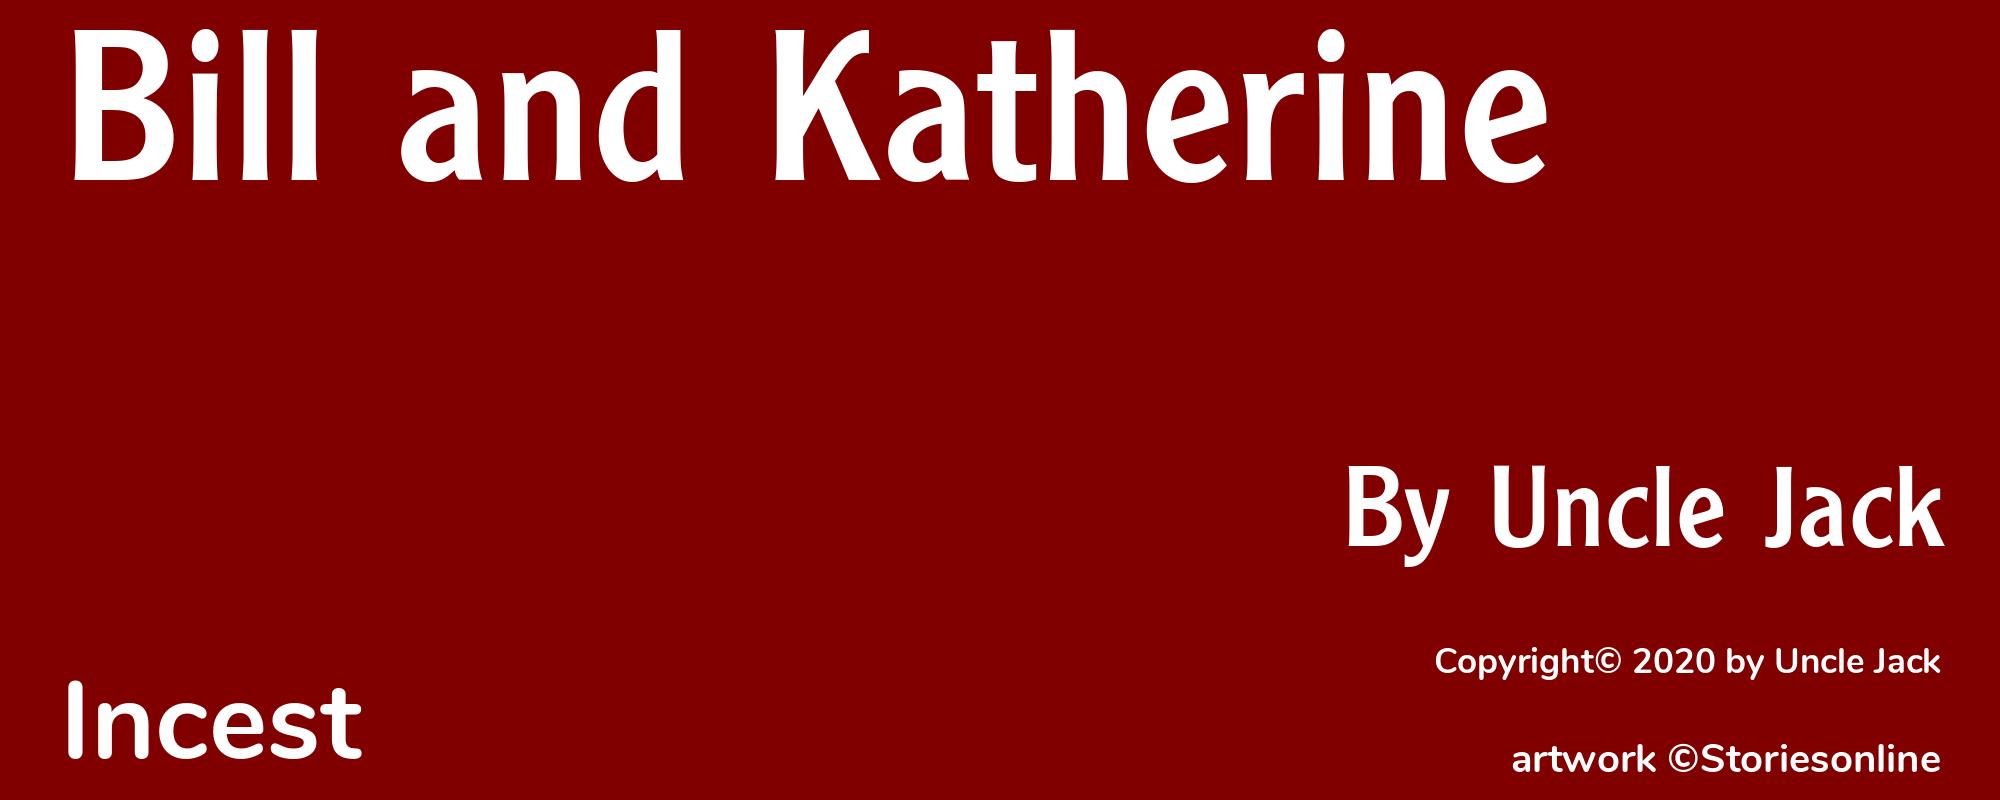 Bill and Katherine - Cover